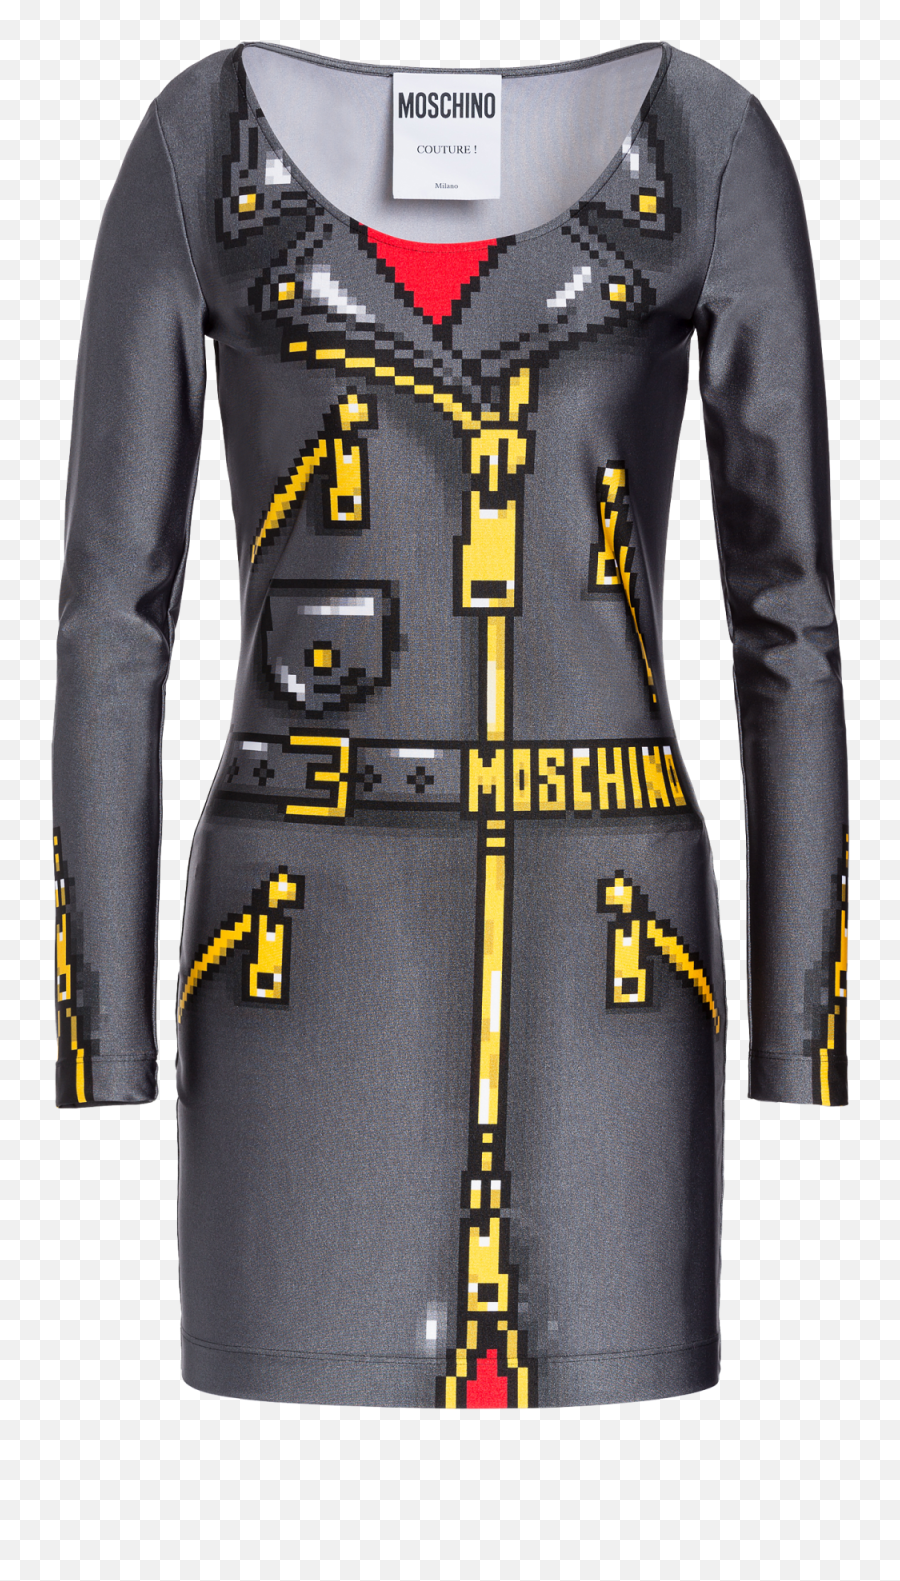 Moschino Reveals Capsule Collection With The Sims The Emoji,Outfits Inspired By Emojis